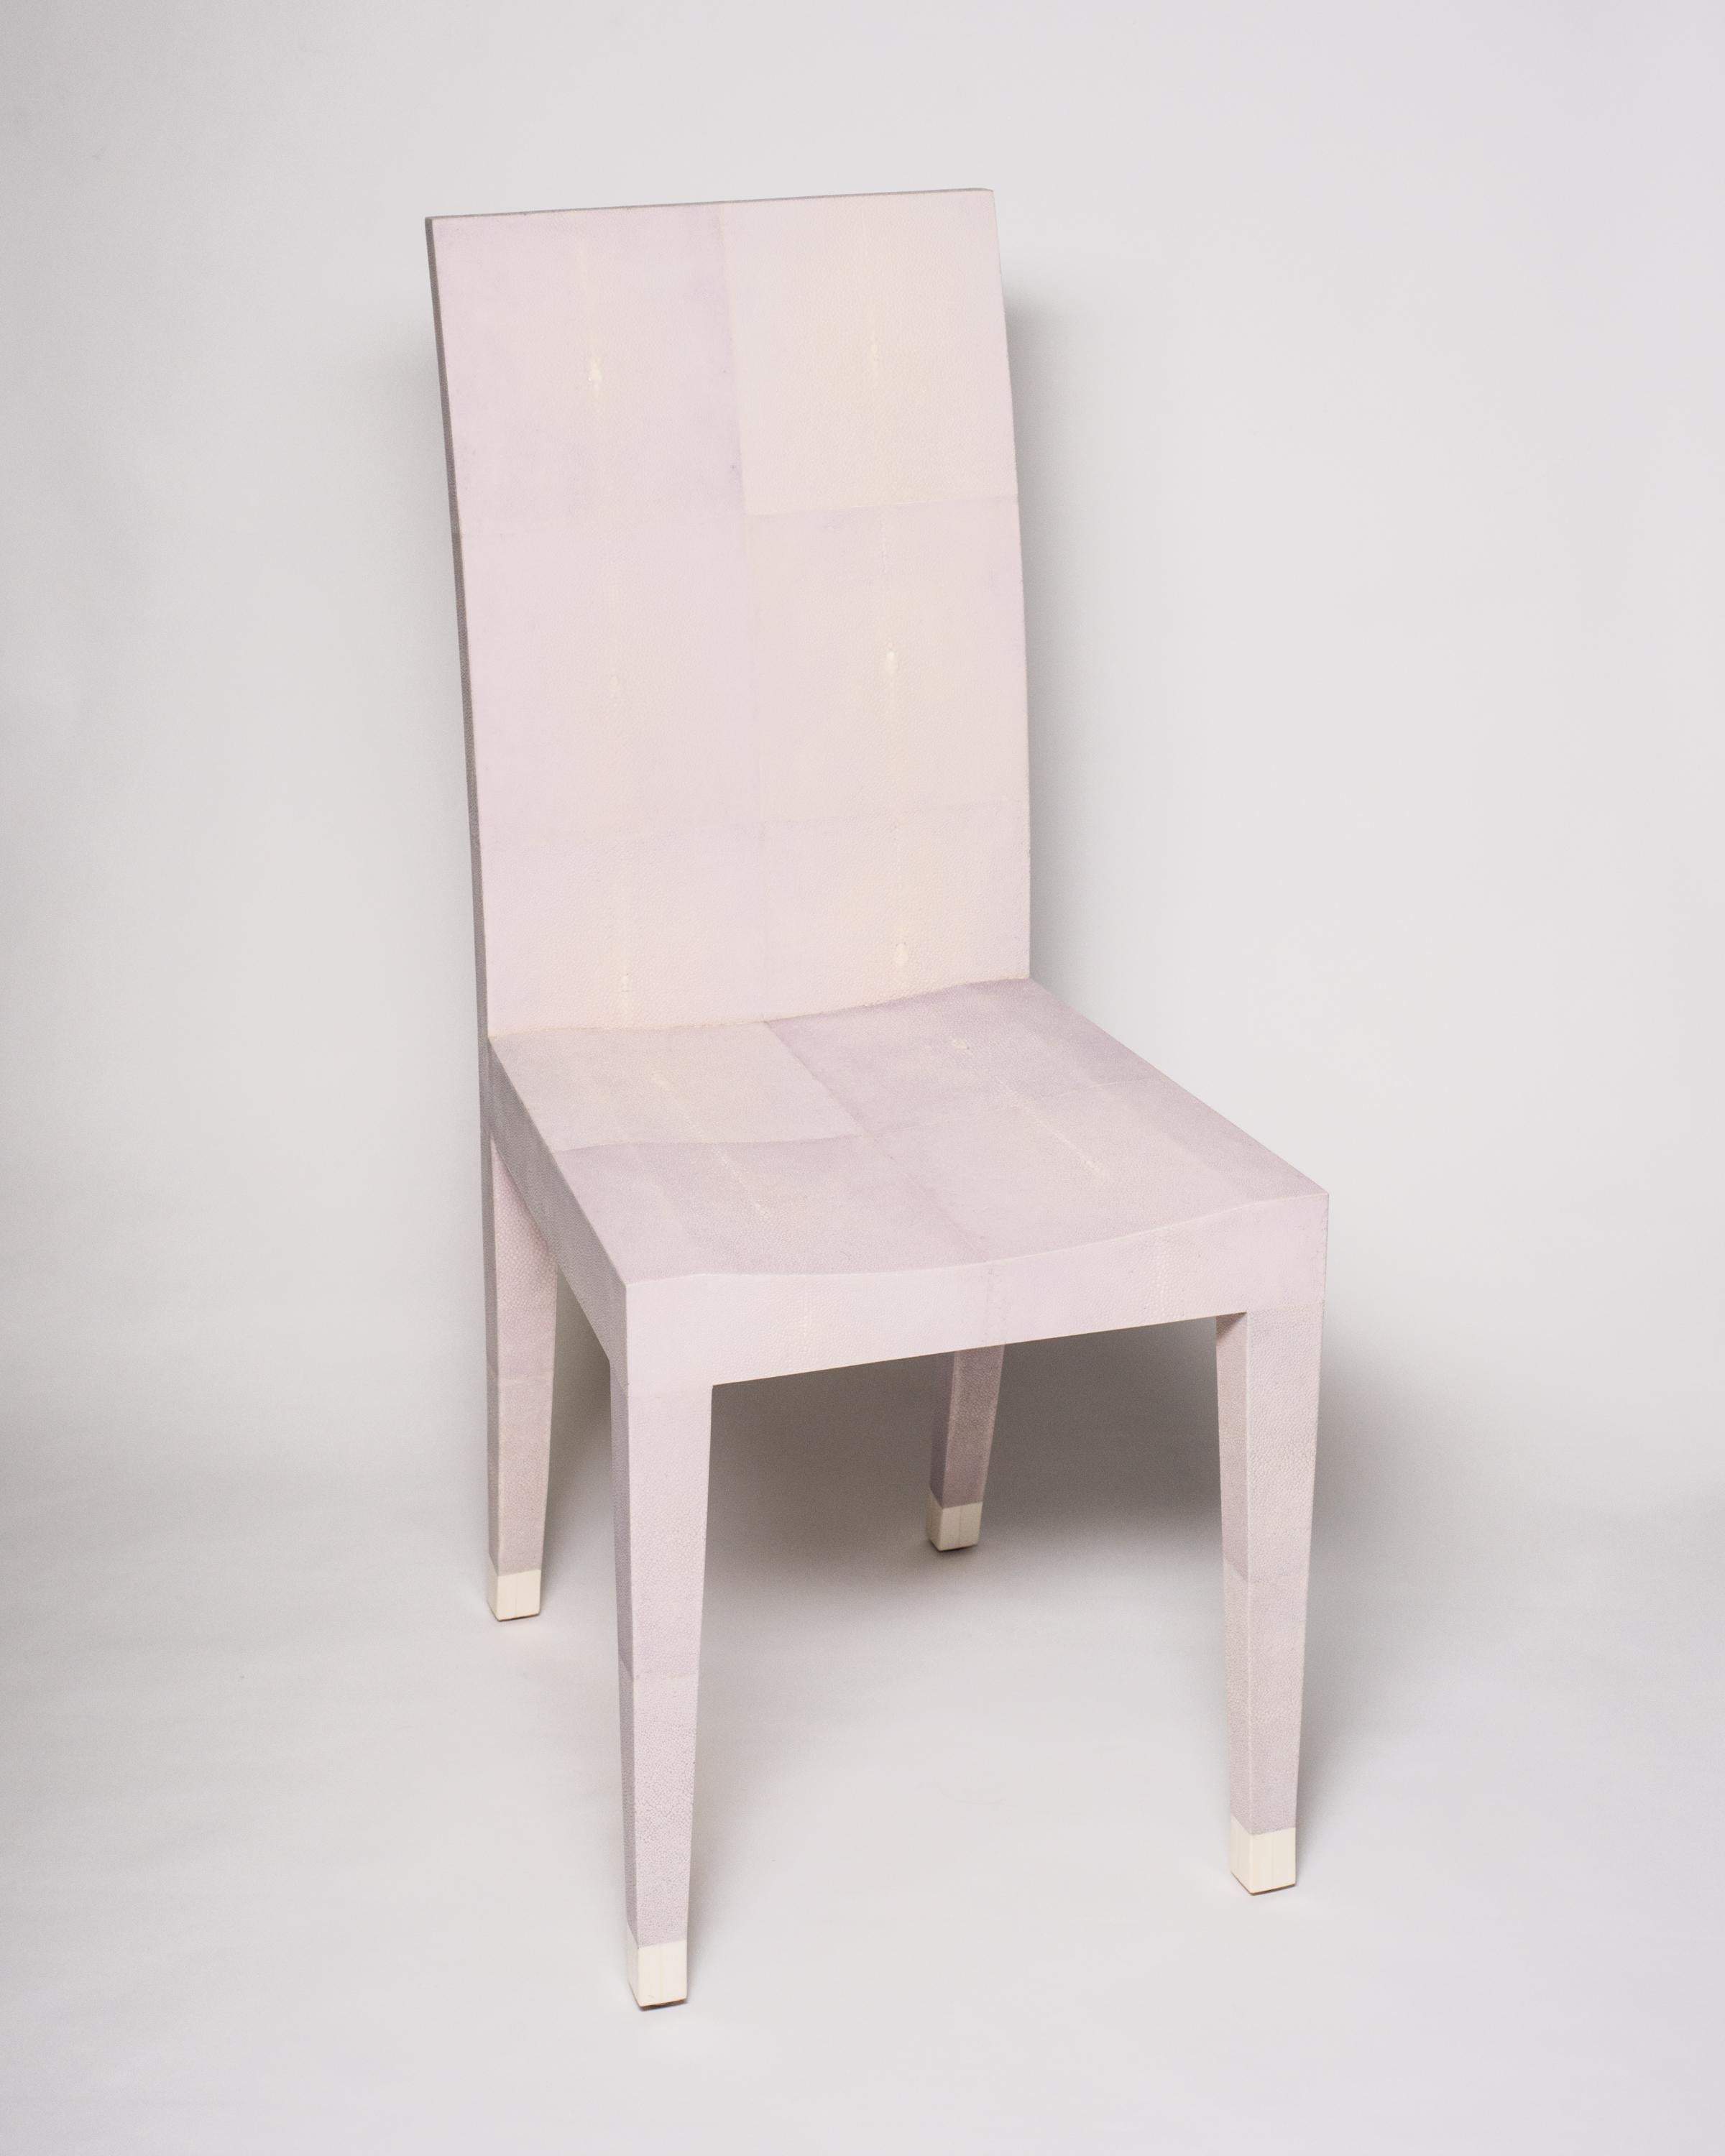 An authentic Shagreen lavender chair. The refined tapered leg is capped with a bone toe. This elegant, versatile, yet modern chair is well suited for a bathroom, a woman’s vanity or a desk.